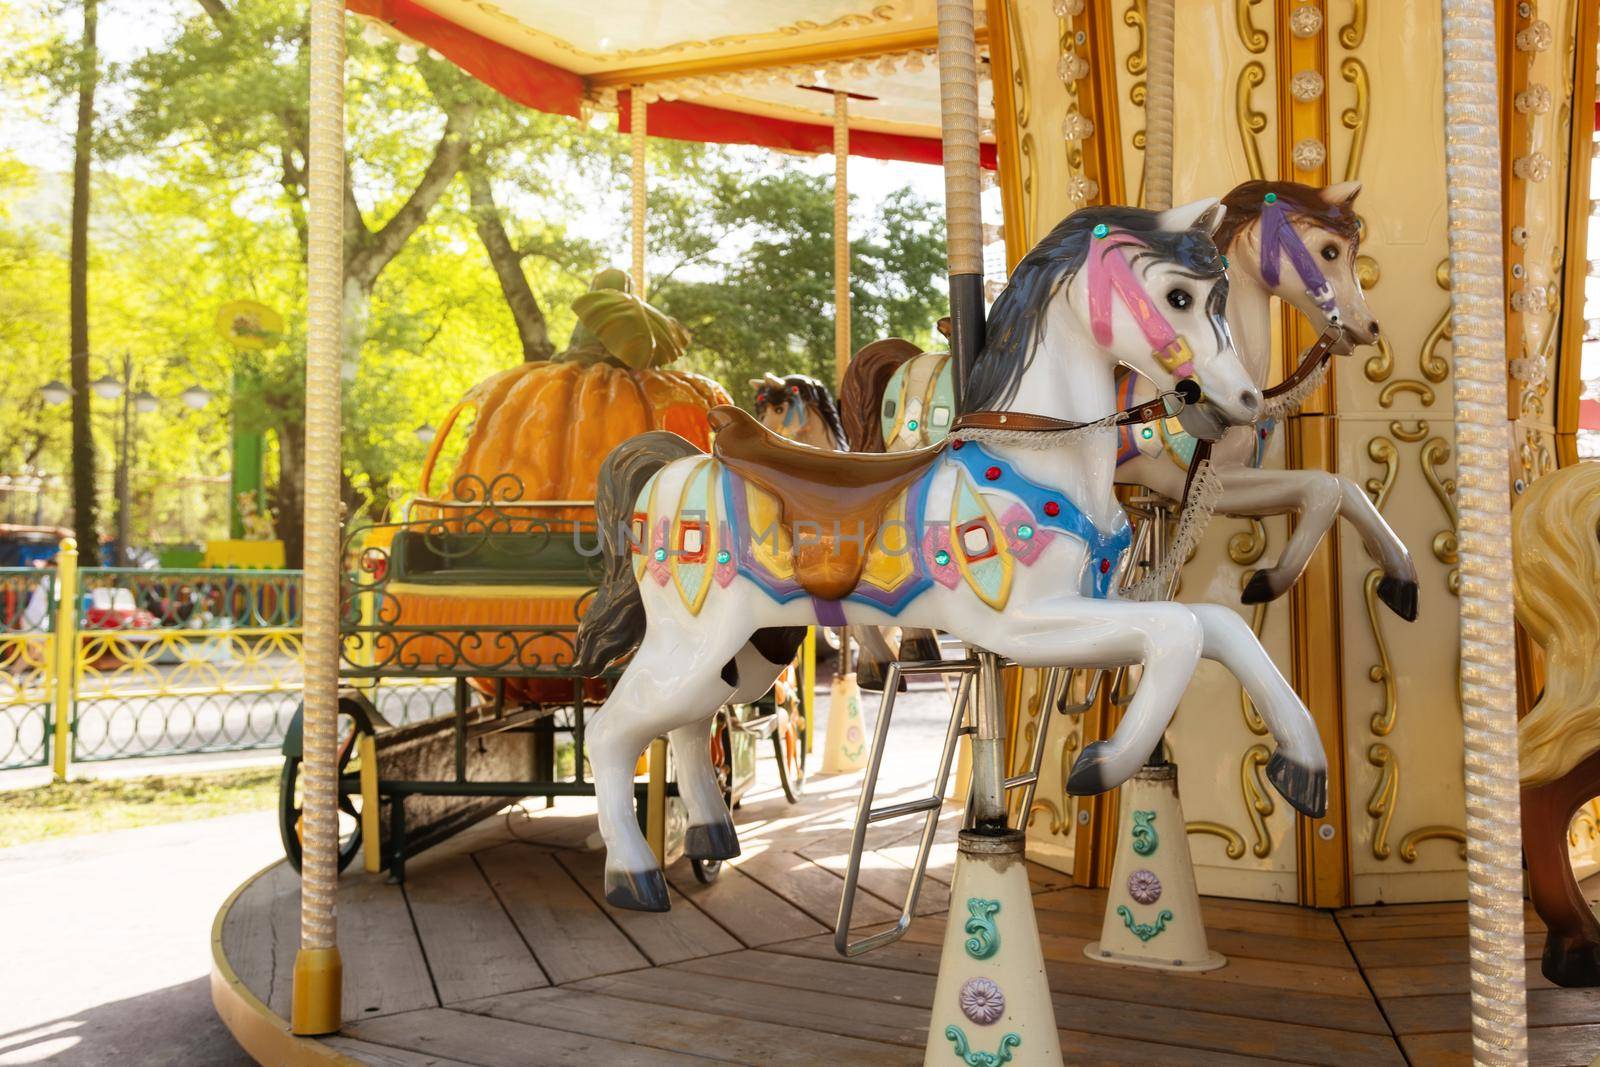 close-up of a colorful, beautiful carousel with horses and a carriage in an amusement park. Green park in summer, on a sunny day, copy space for your design